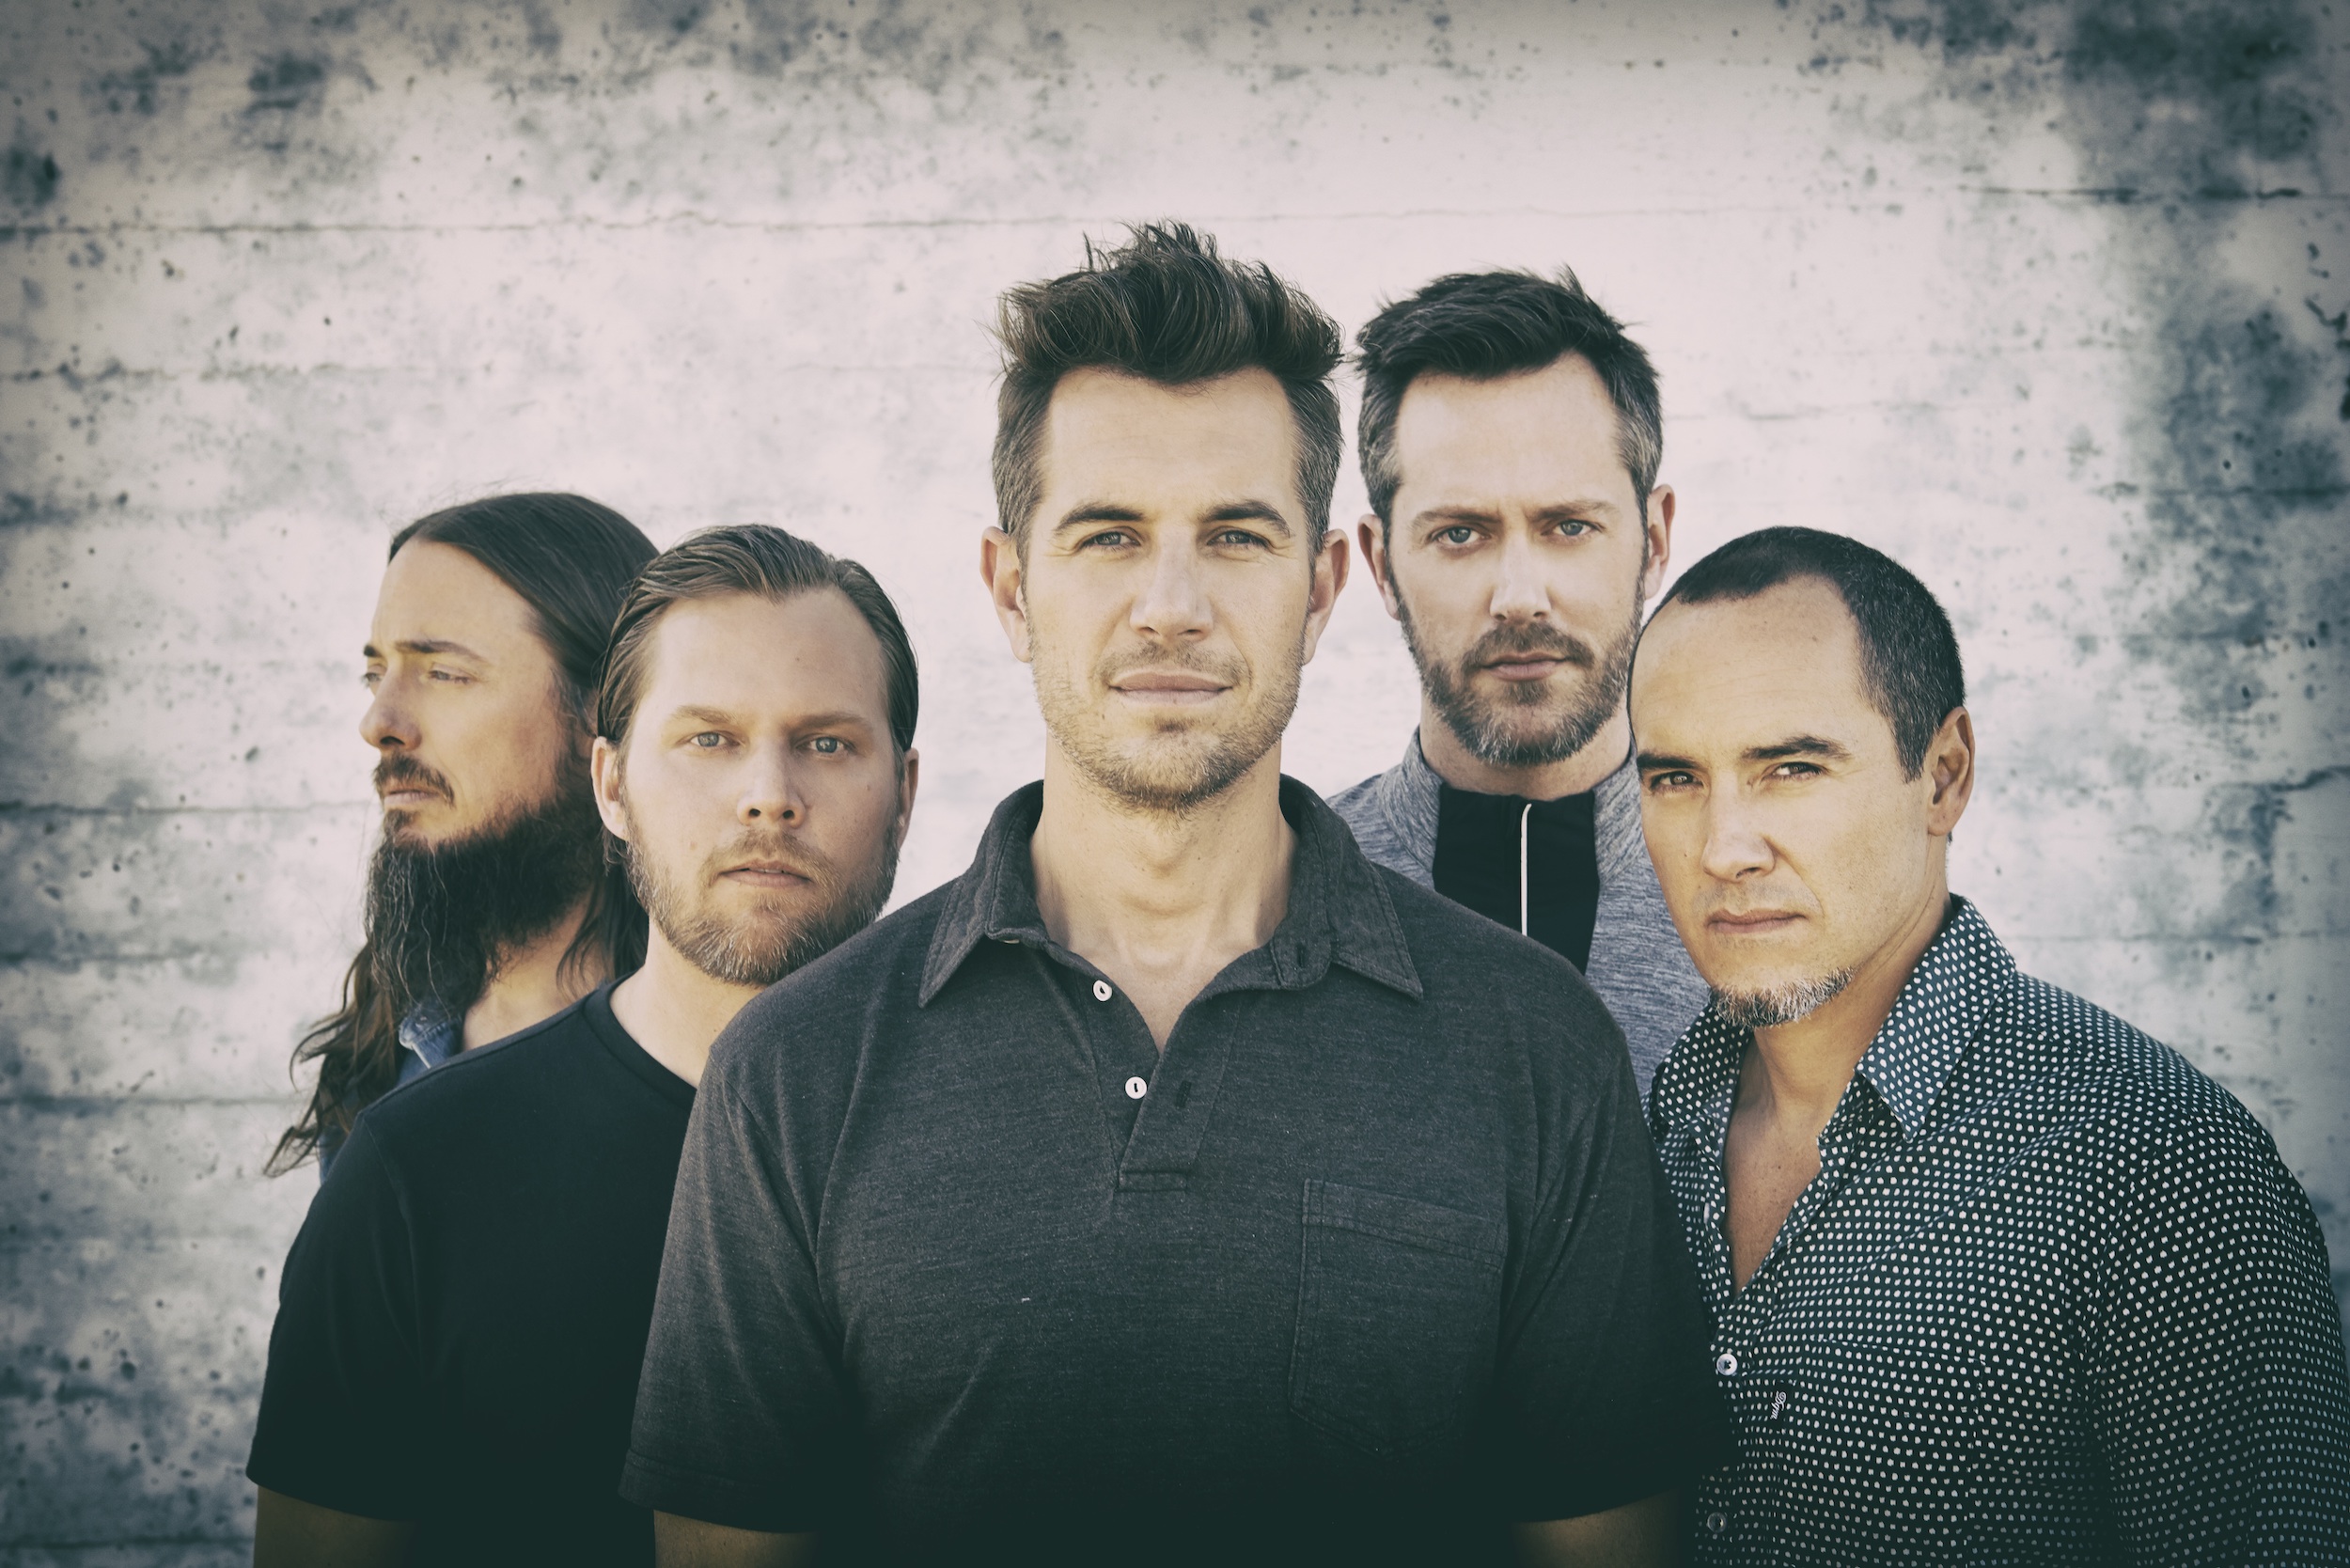 Multi-platinum rock band 311 have announced a July 19th release date for th...